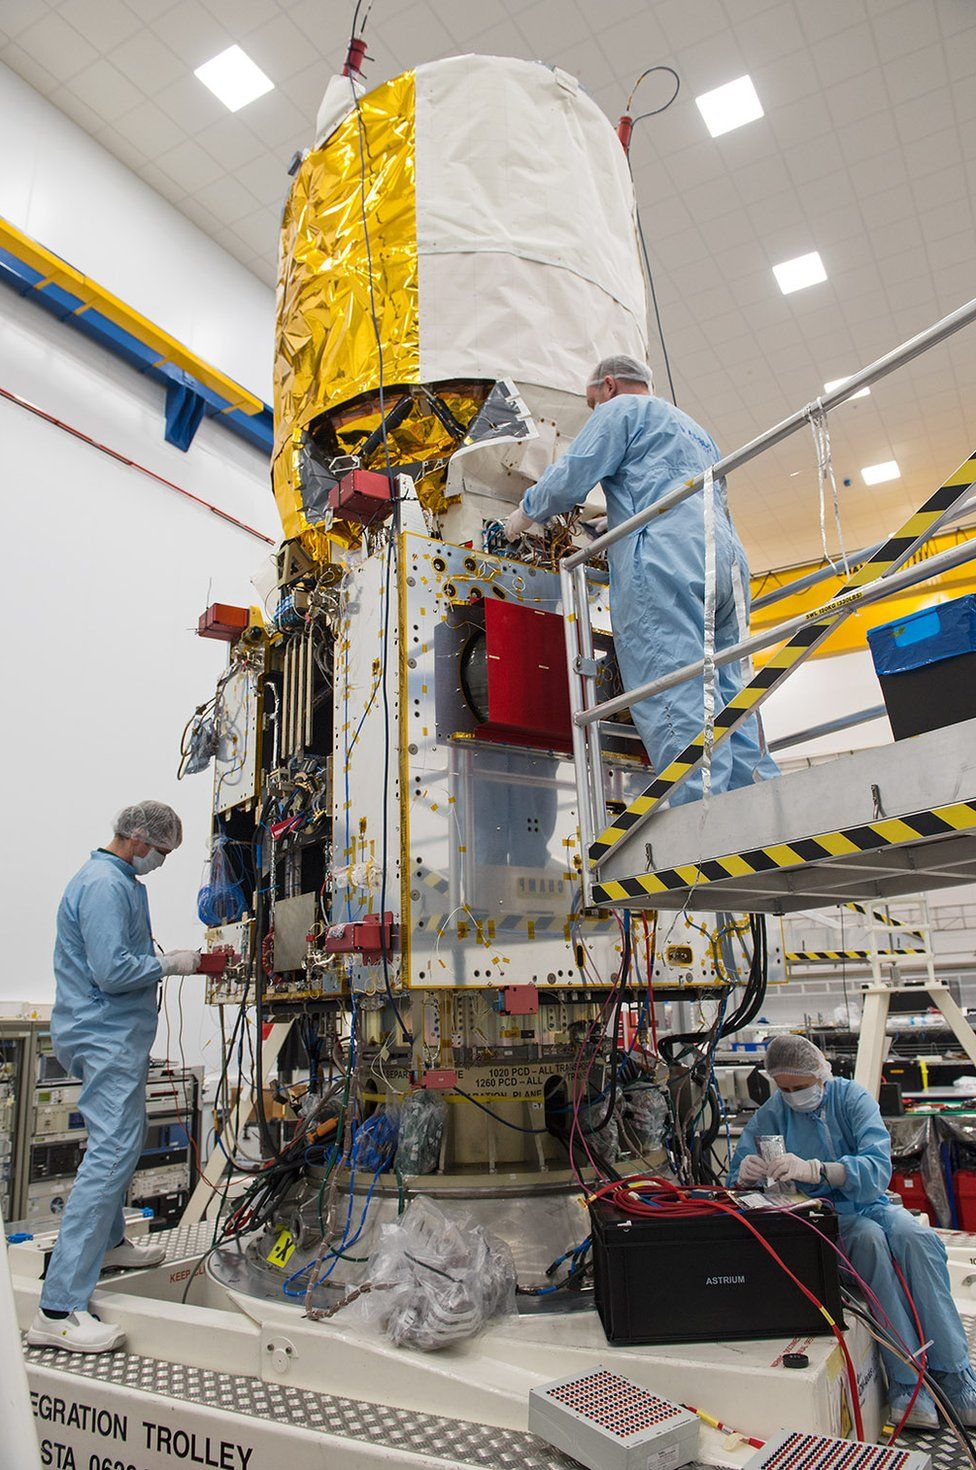 British engineers have led the assembly of the Esa satellite